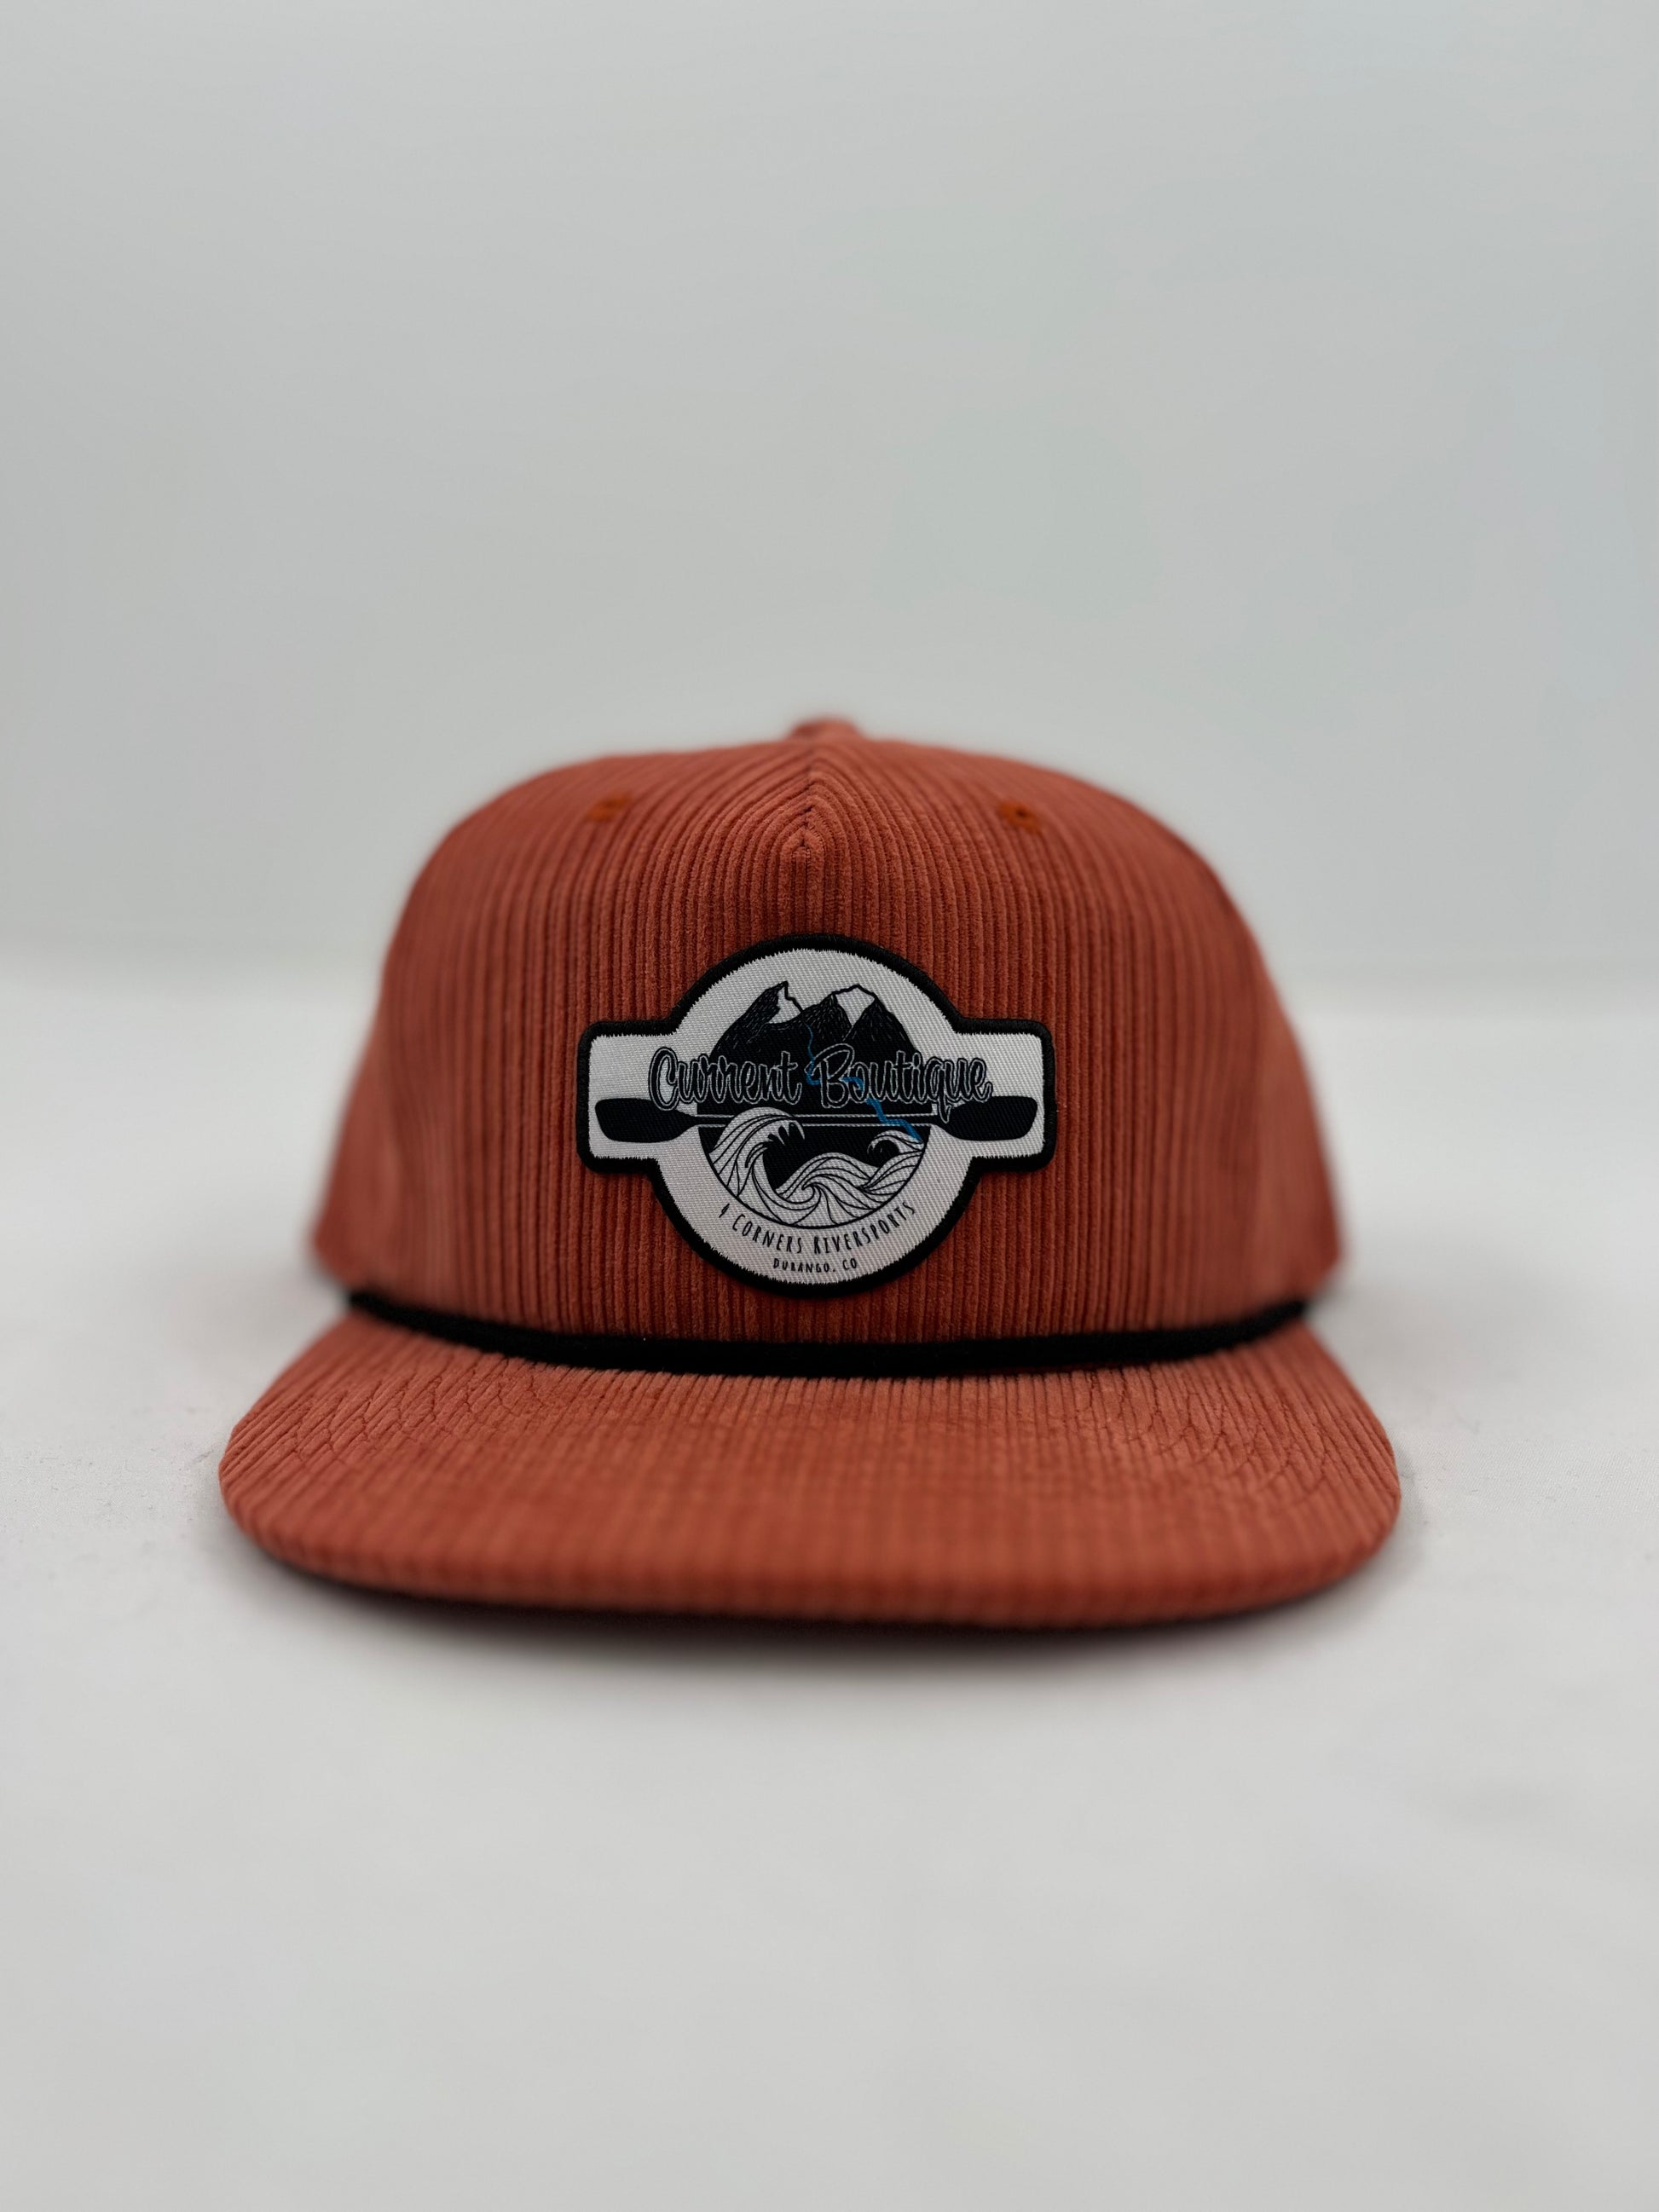 A Current Boutique Cord Pops Hat by Captuer Headwear with a logo on the front, displayed against a neutral background.